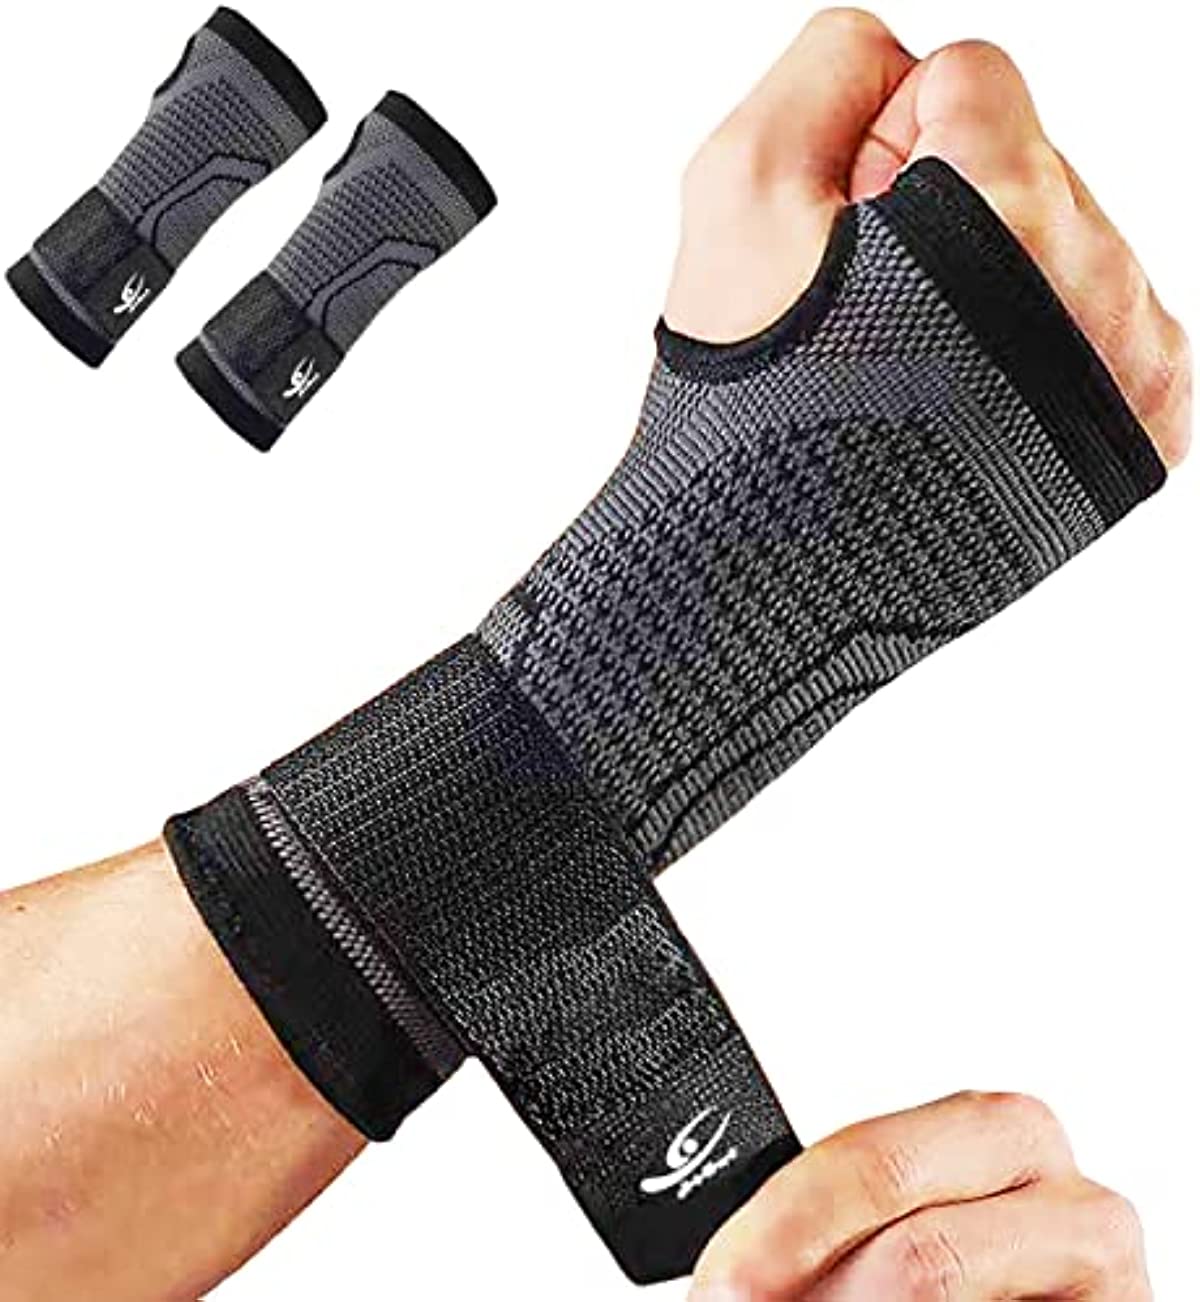 HiRui 2-Pack Wrist Brace Wrist Wrap, Wrist Strap Hand Compression Sleeves Support for Fitness Weightlifting MTB Tendonitis Sprains Recovery, Carpal Tunnel Arthritis, Pain Relief (Black, Small)